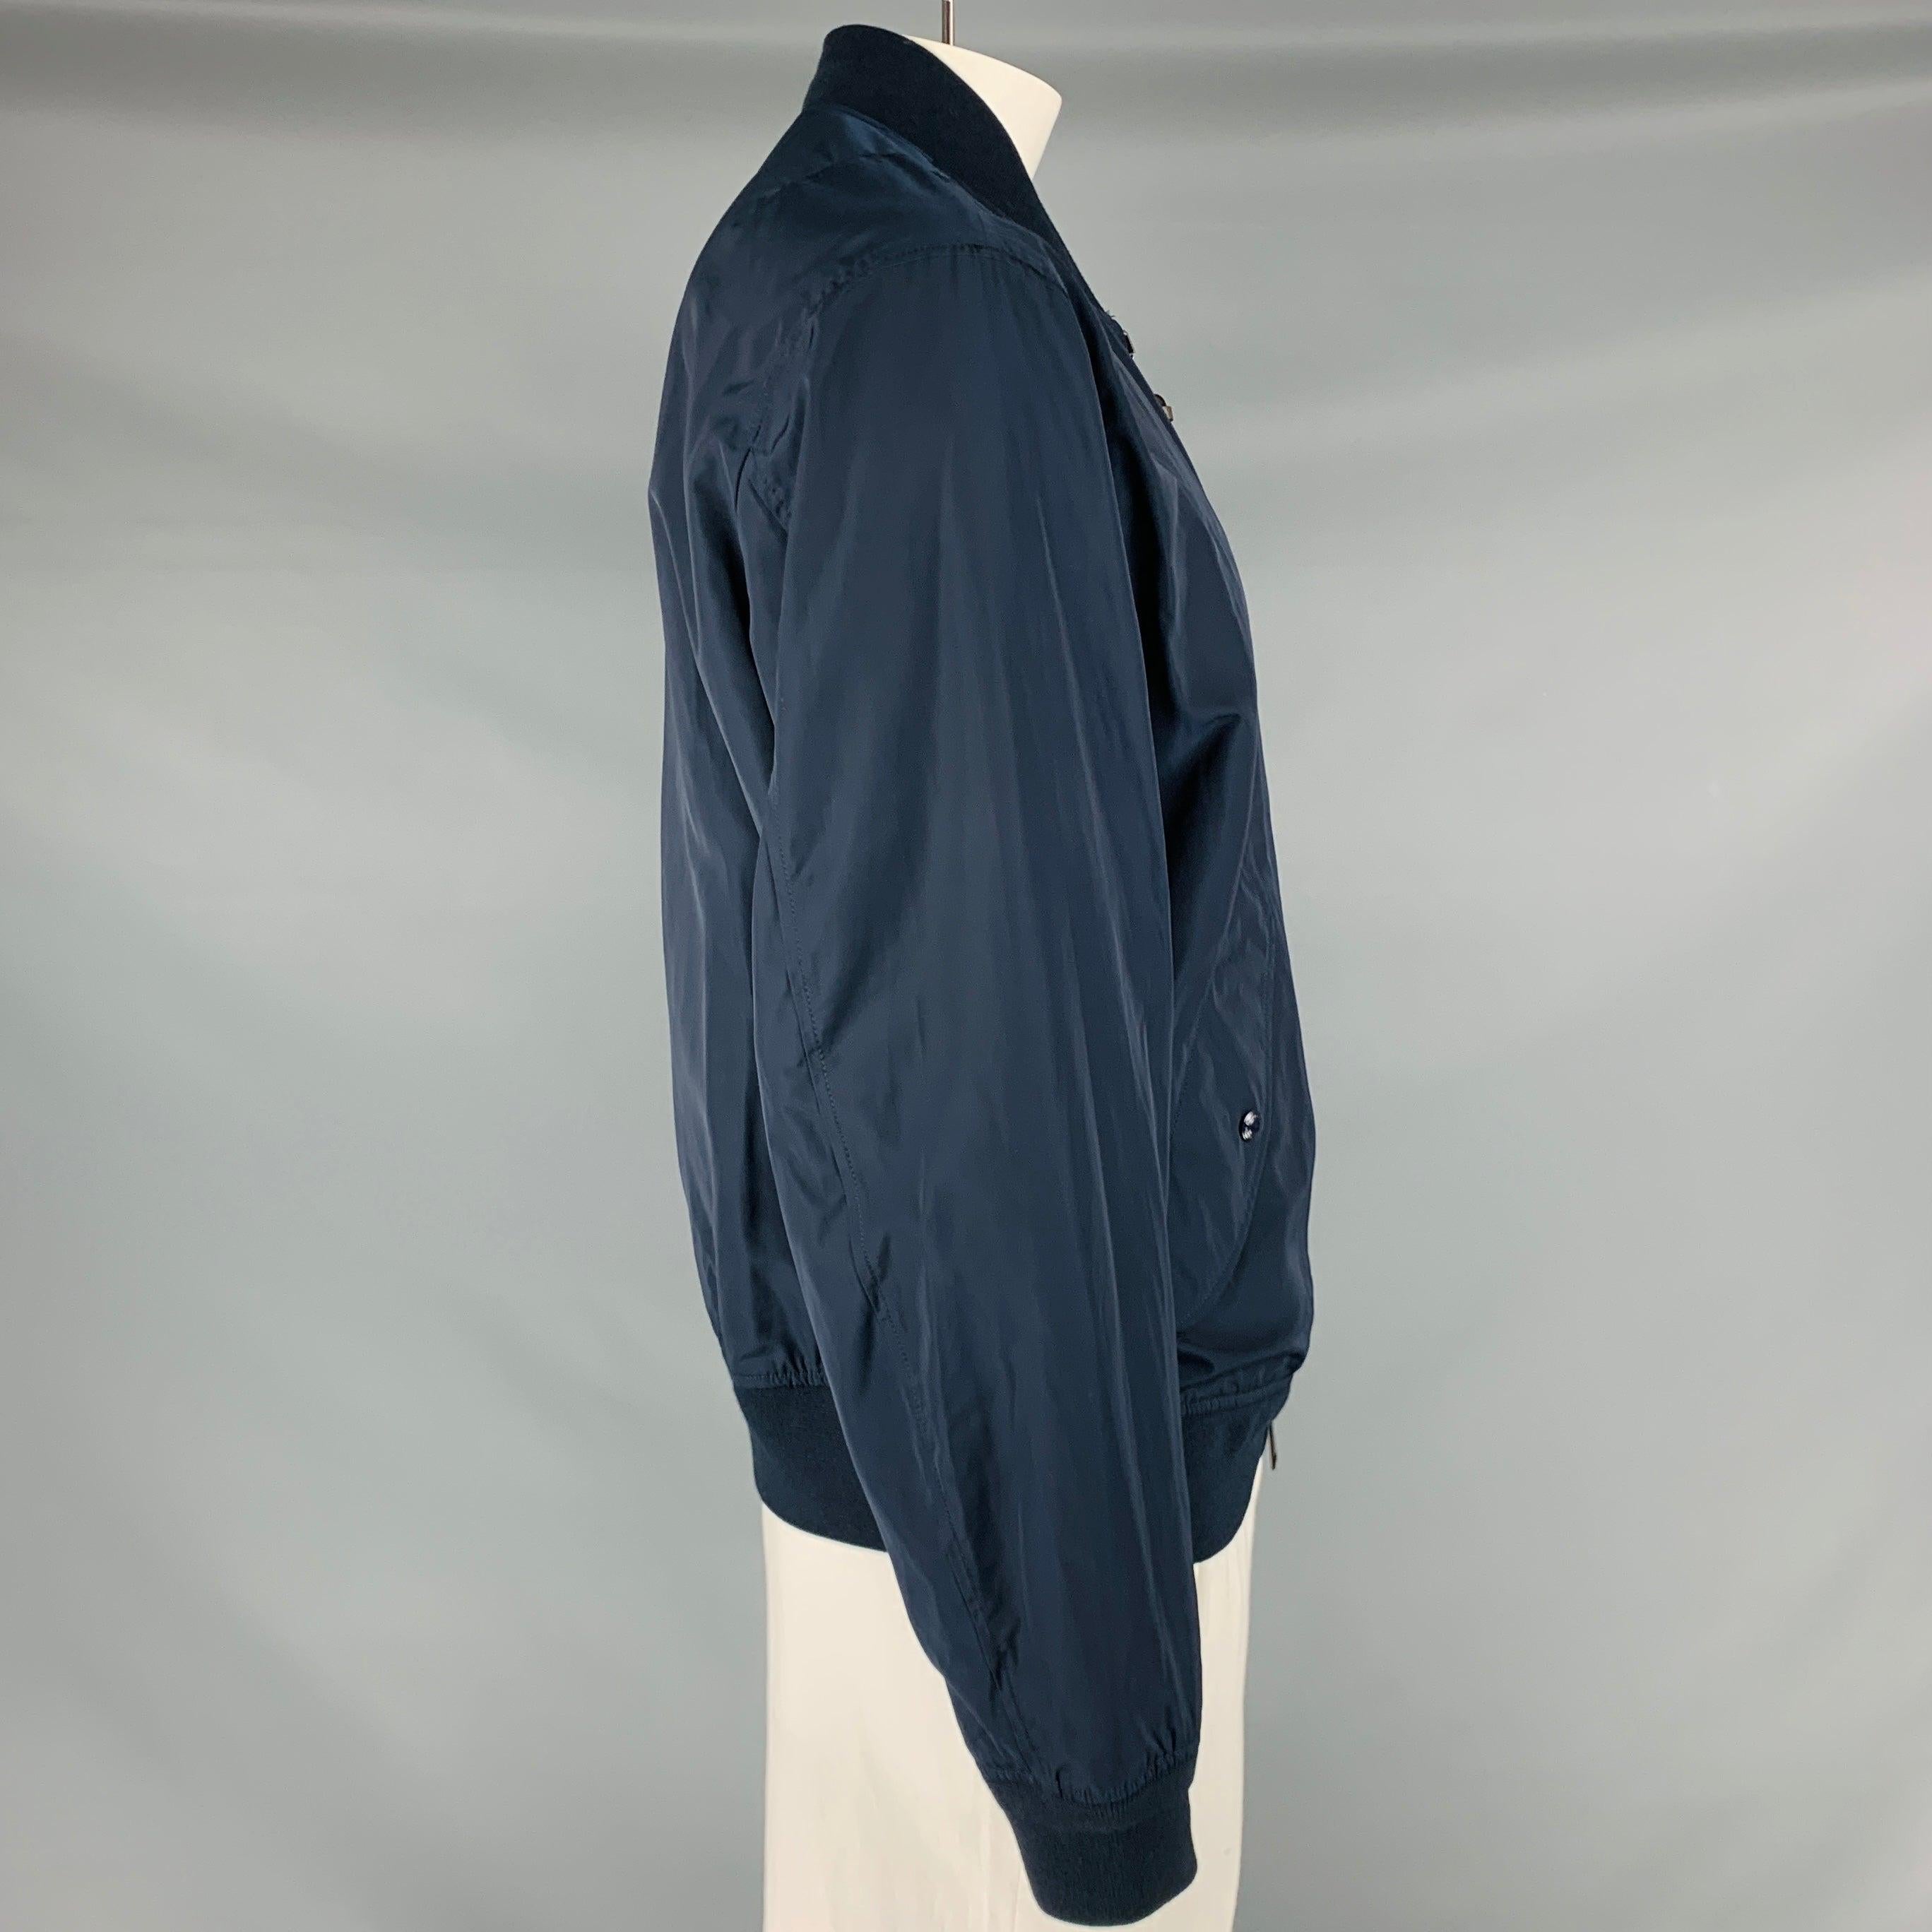 RALPH LAUREN Size XL Navy Polyester Bomber Jacket In Good Condition For Sale In San Francisco, CA